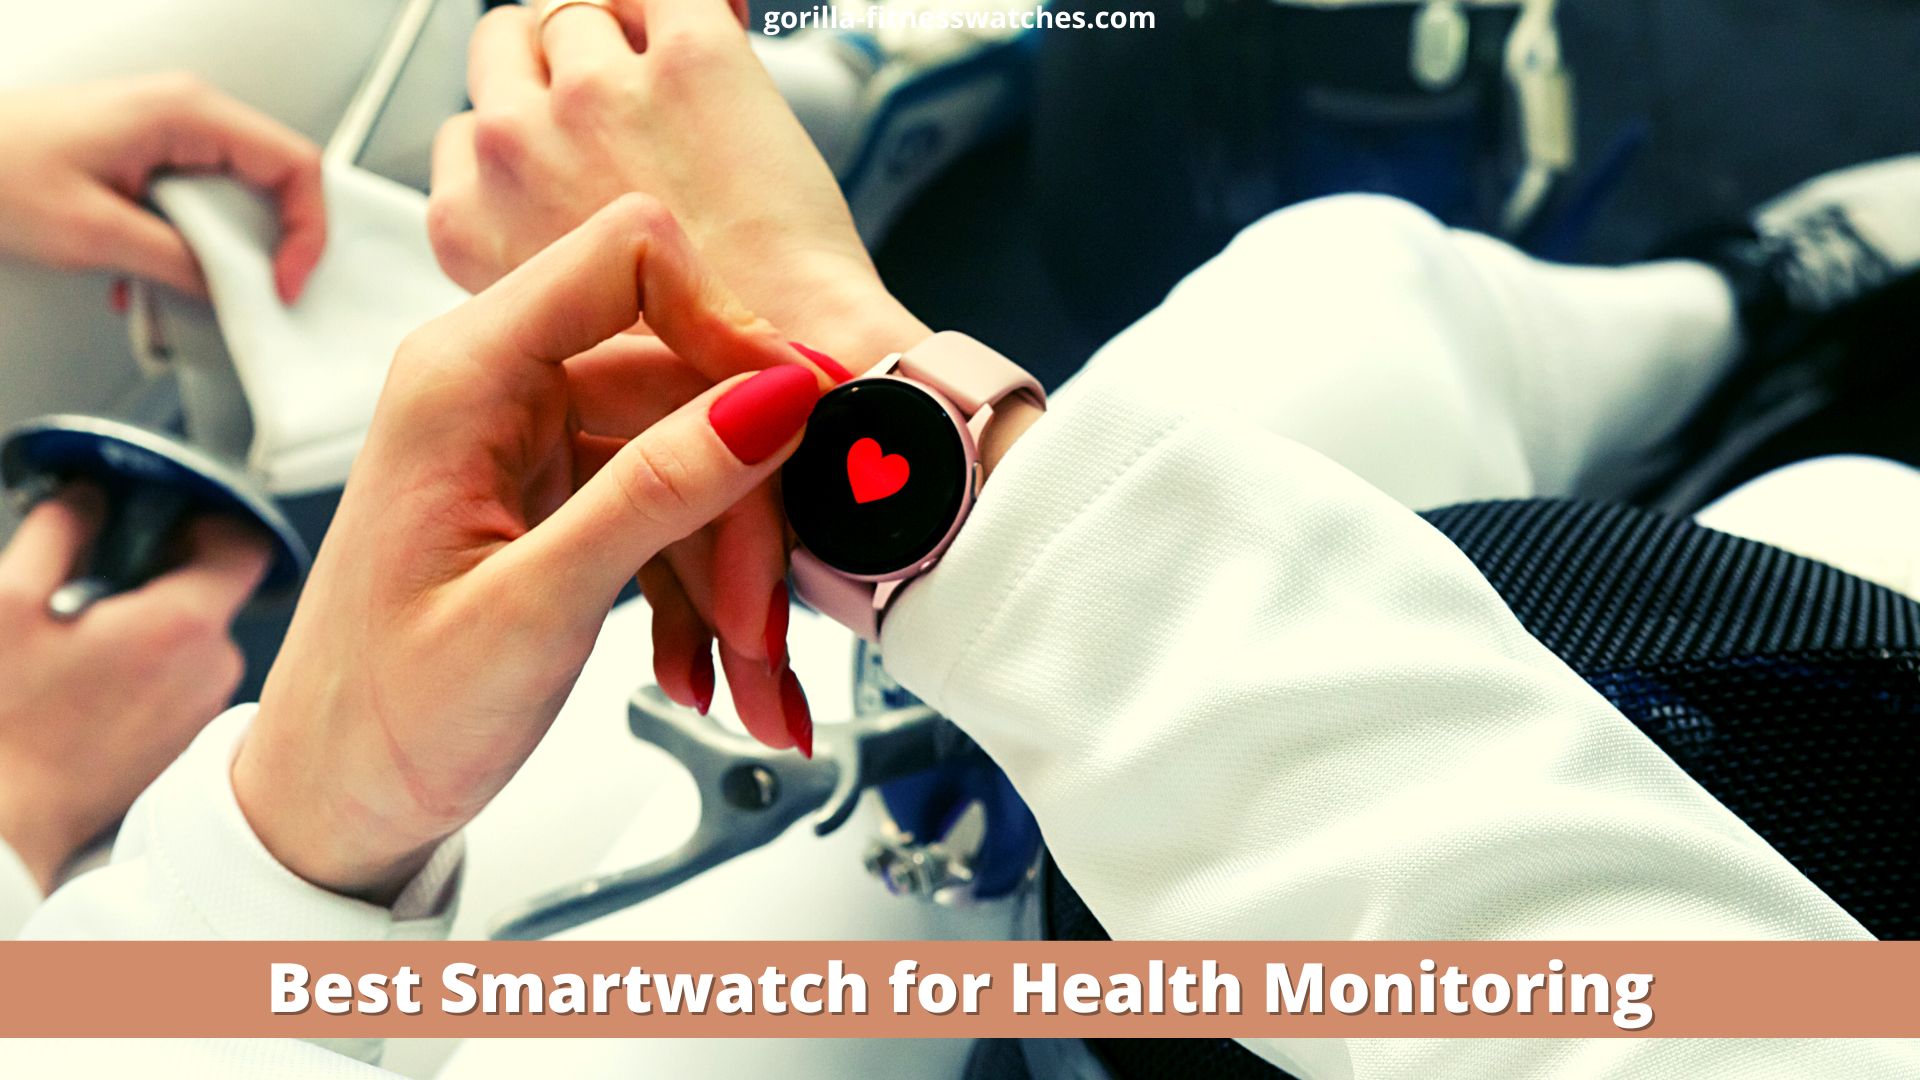 Best Smartwatch for Health Monitoring